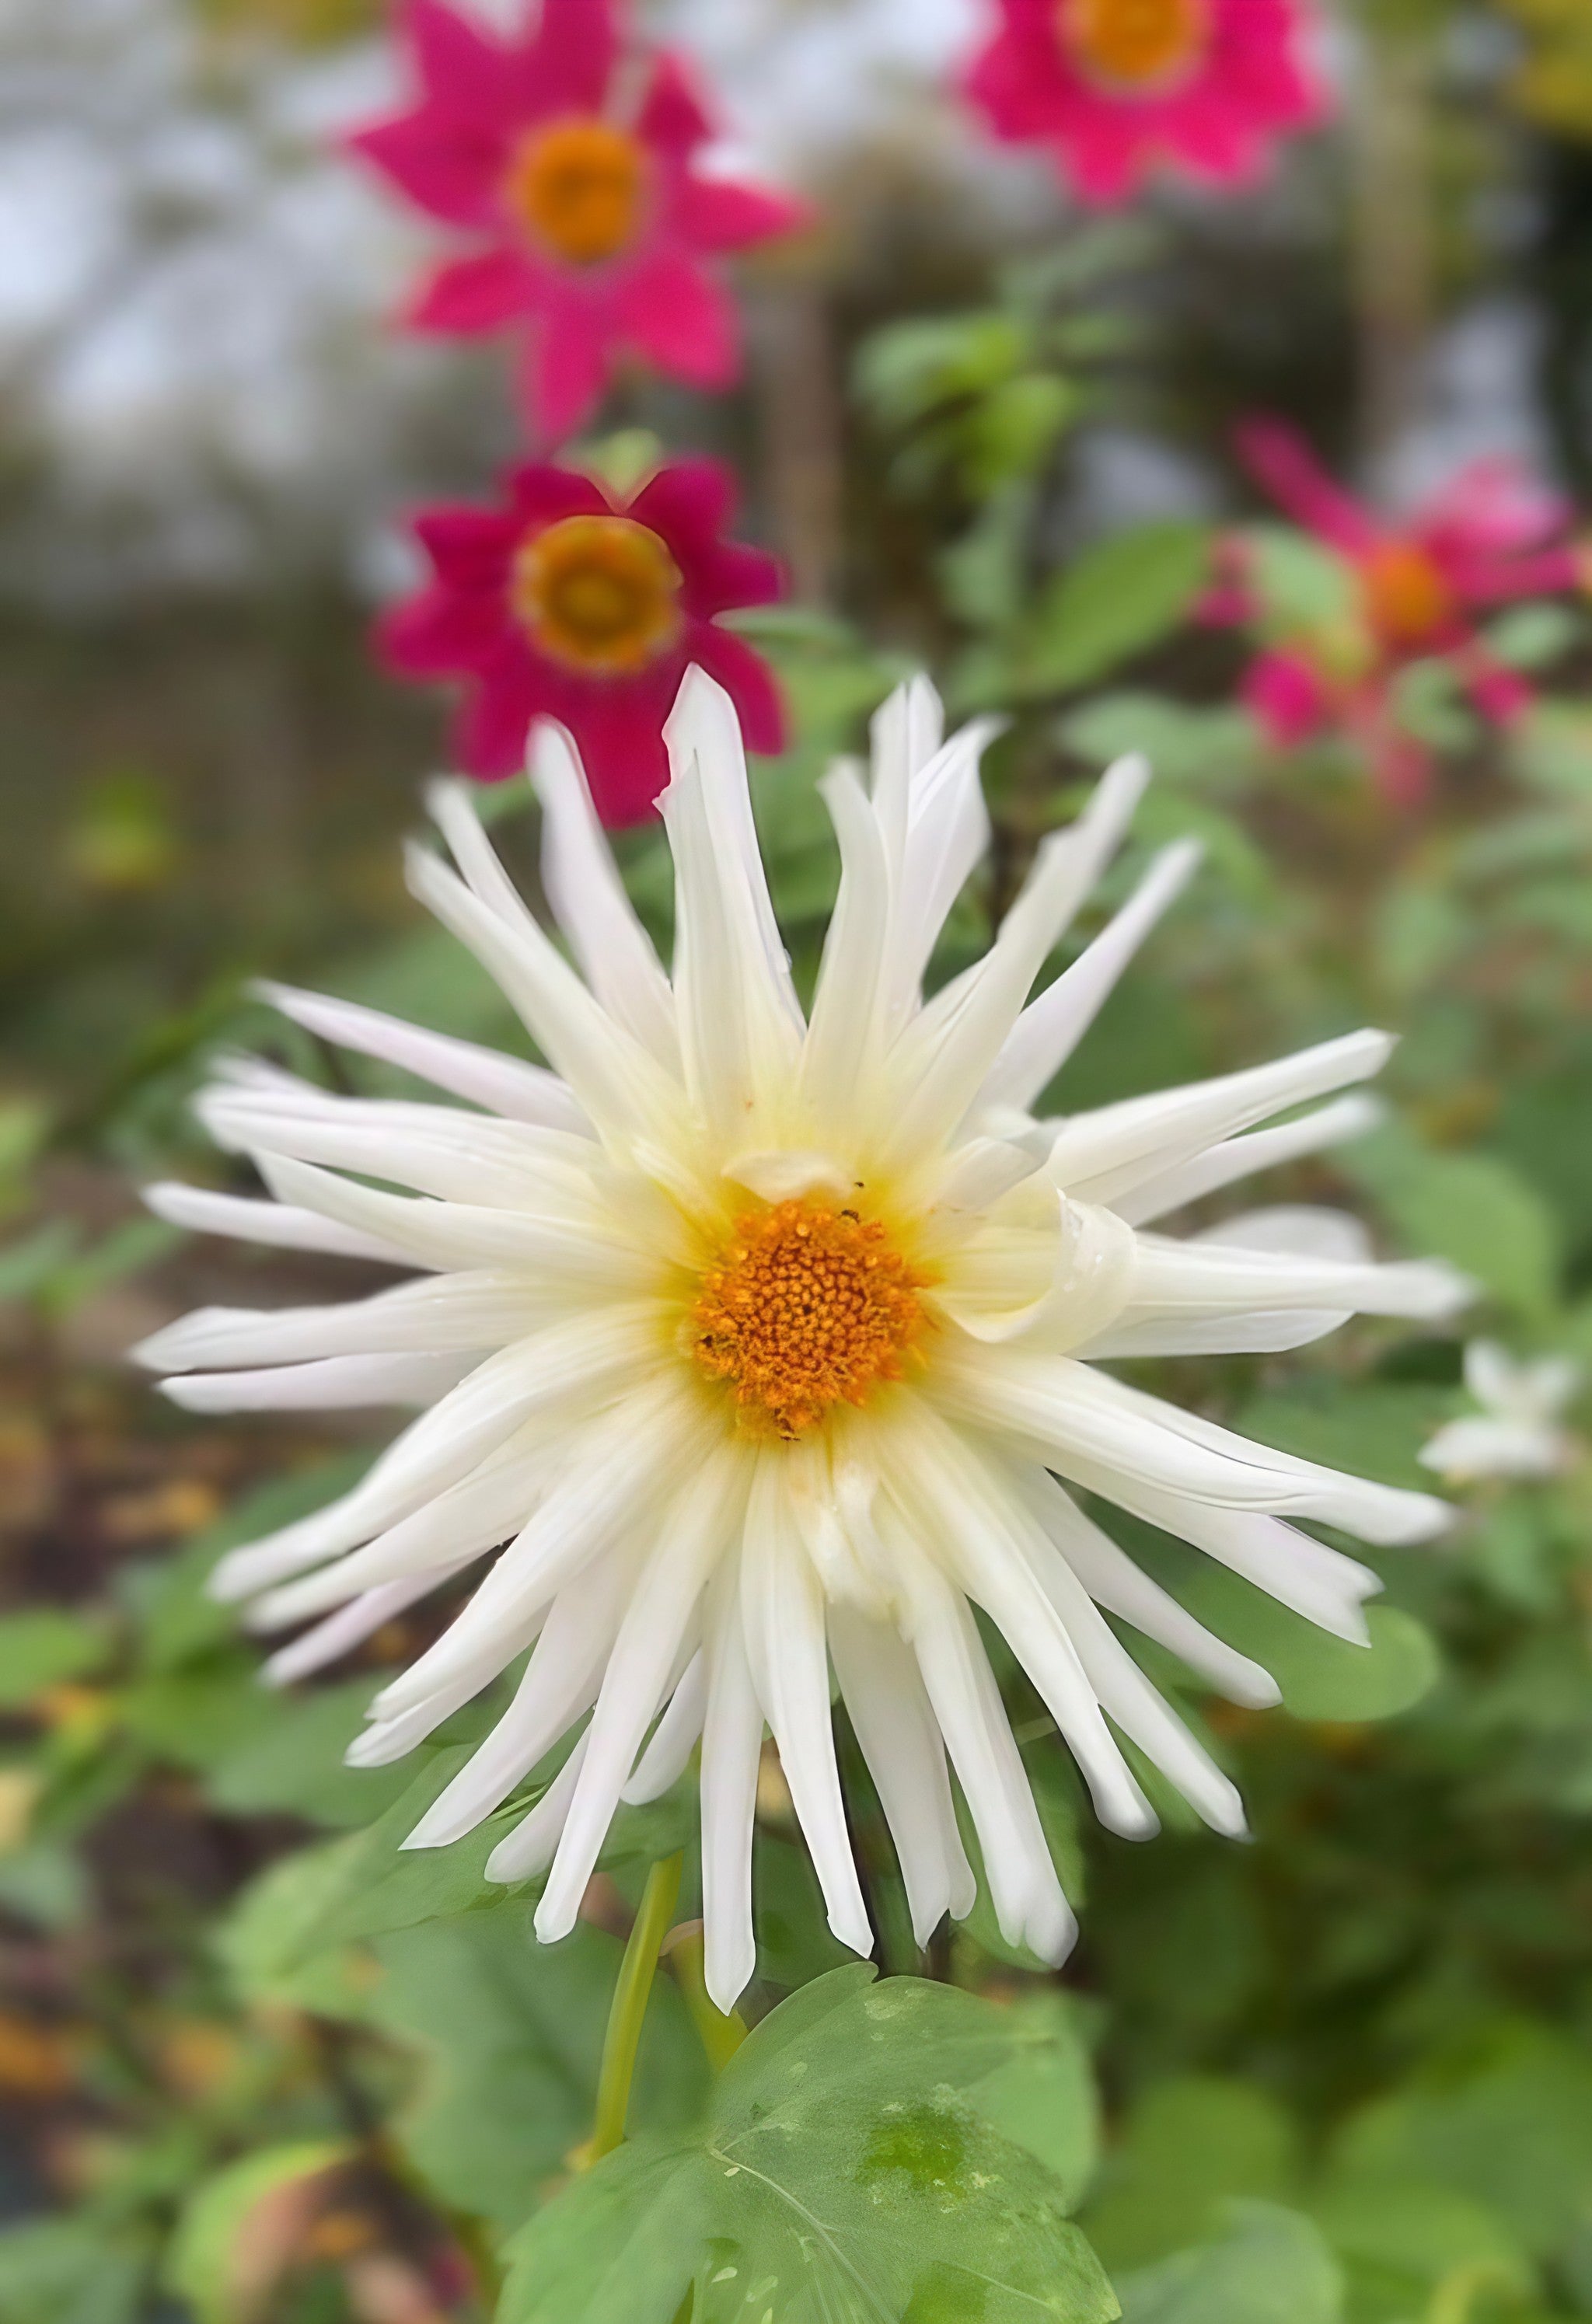 Cactus dahlia displaying white and yellow hues with a backdrop of red petals